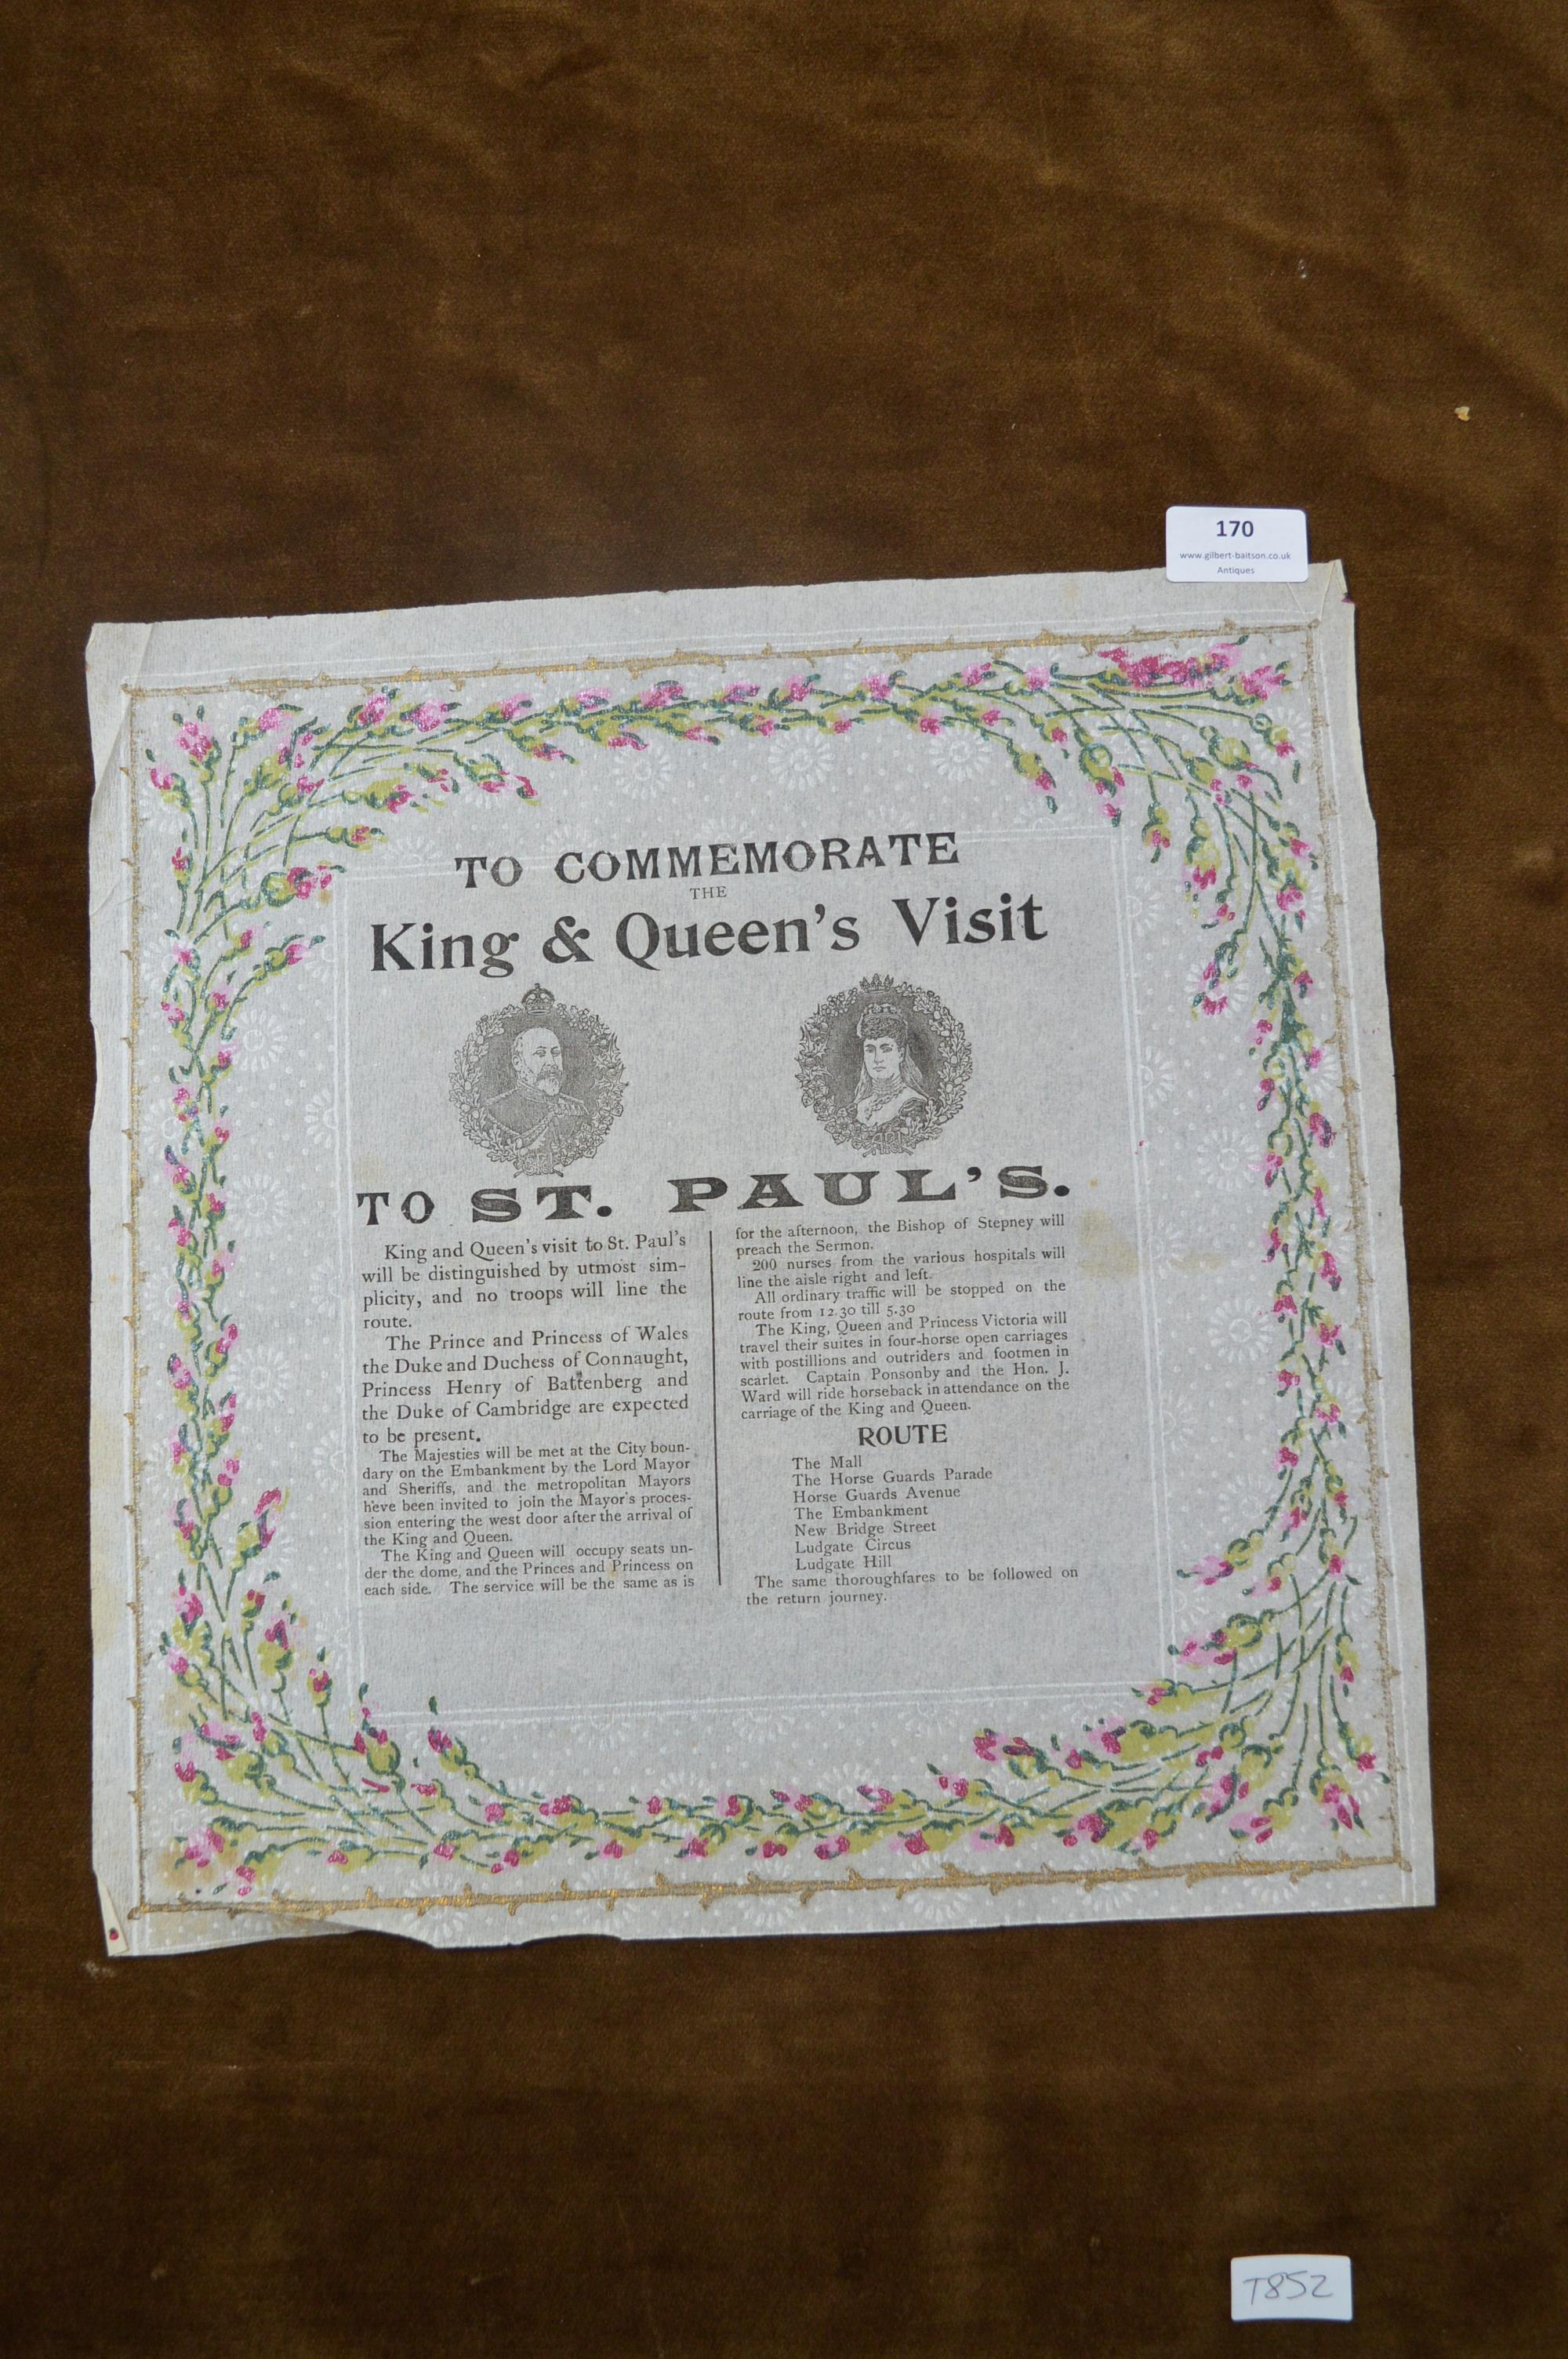 Paper Commemorative - The King and Queens Visit to St Paul's, London